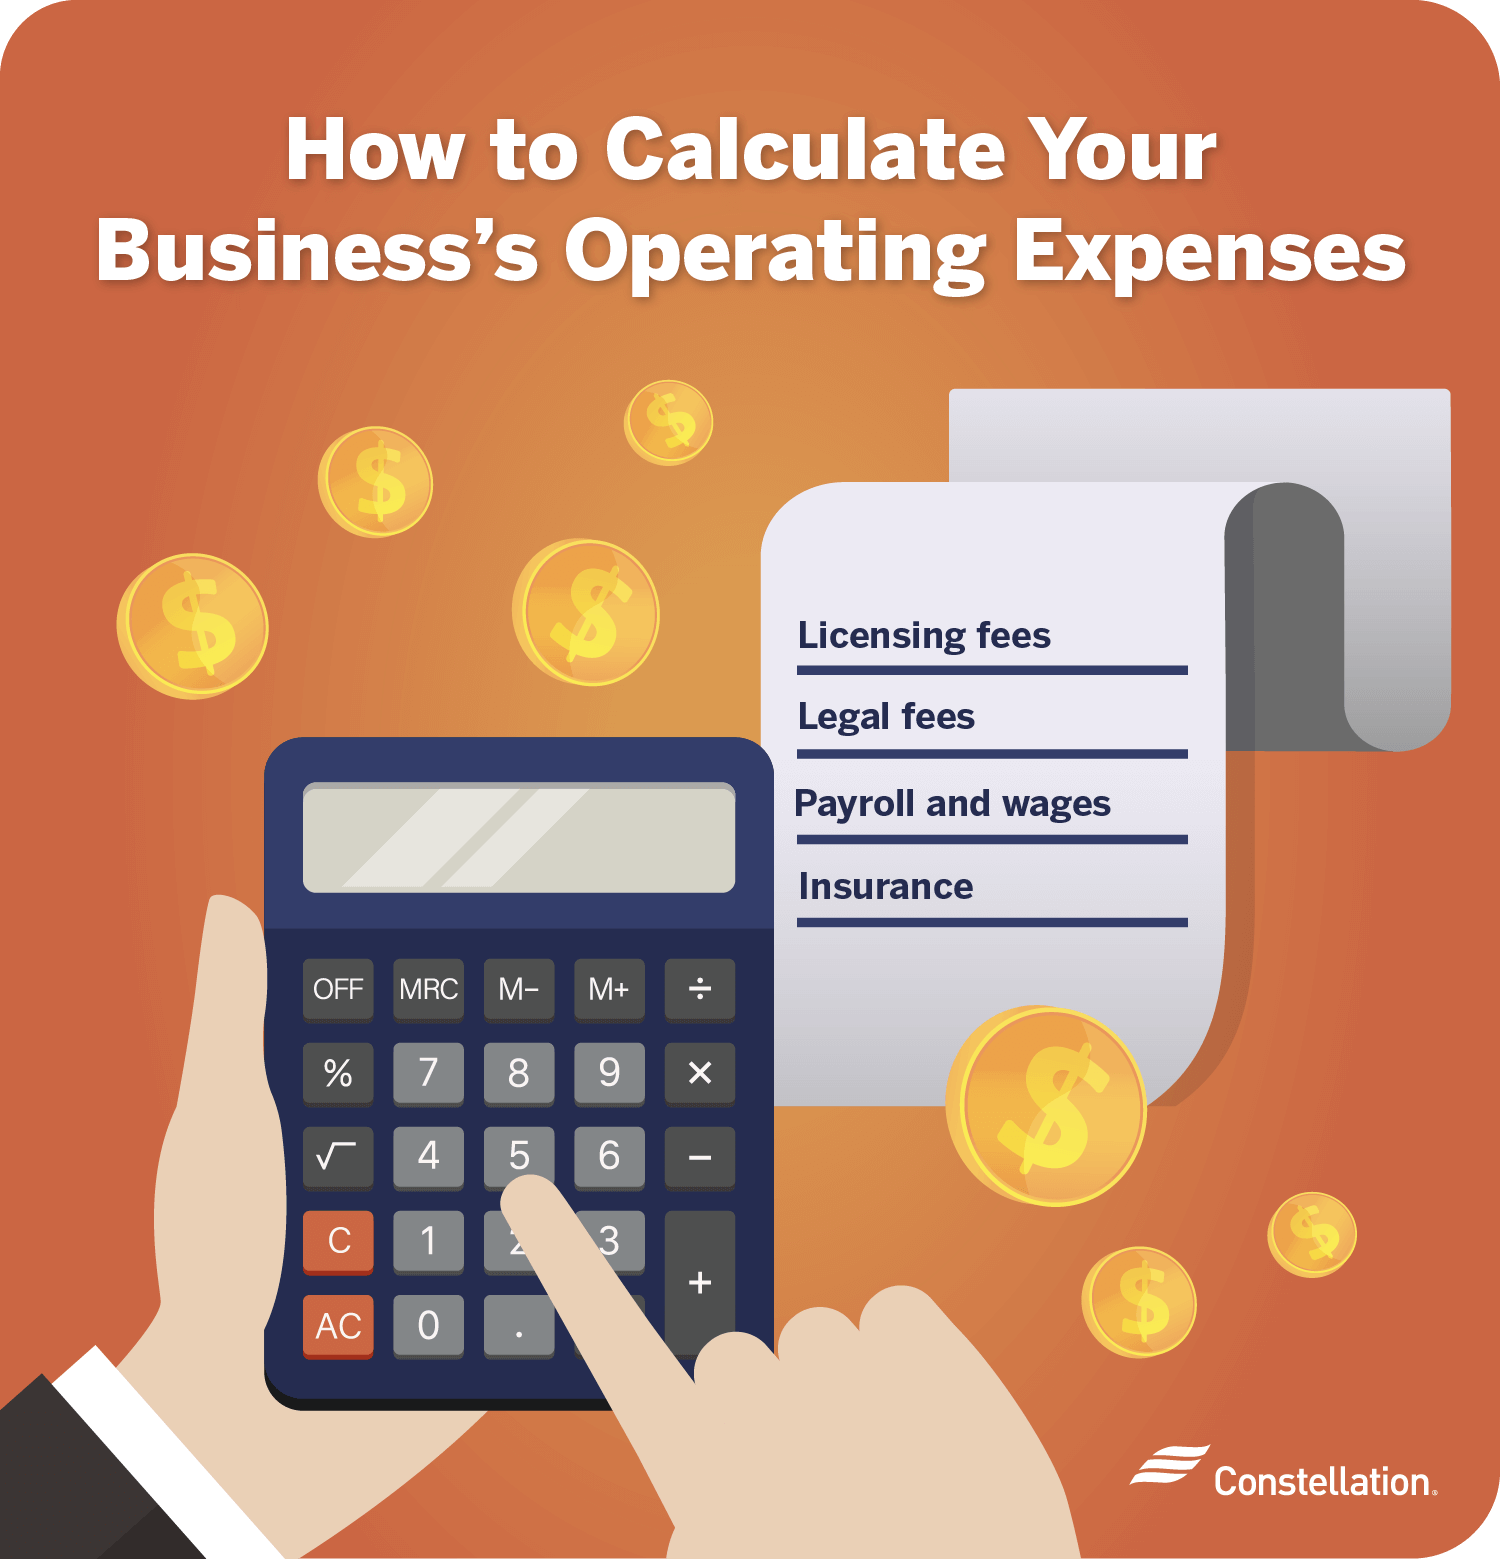 How to calculate business operating expenses.